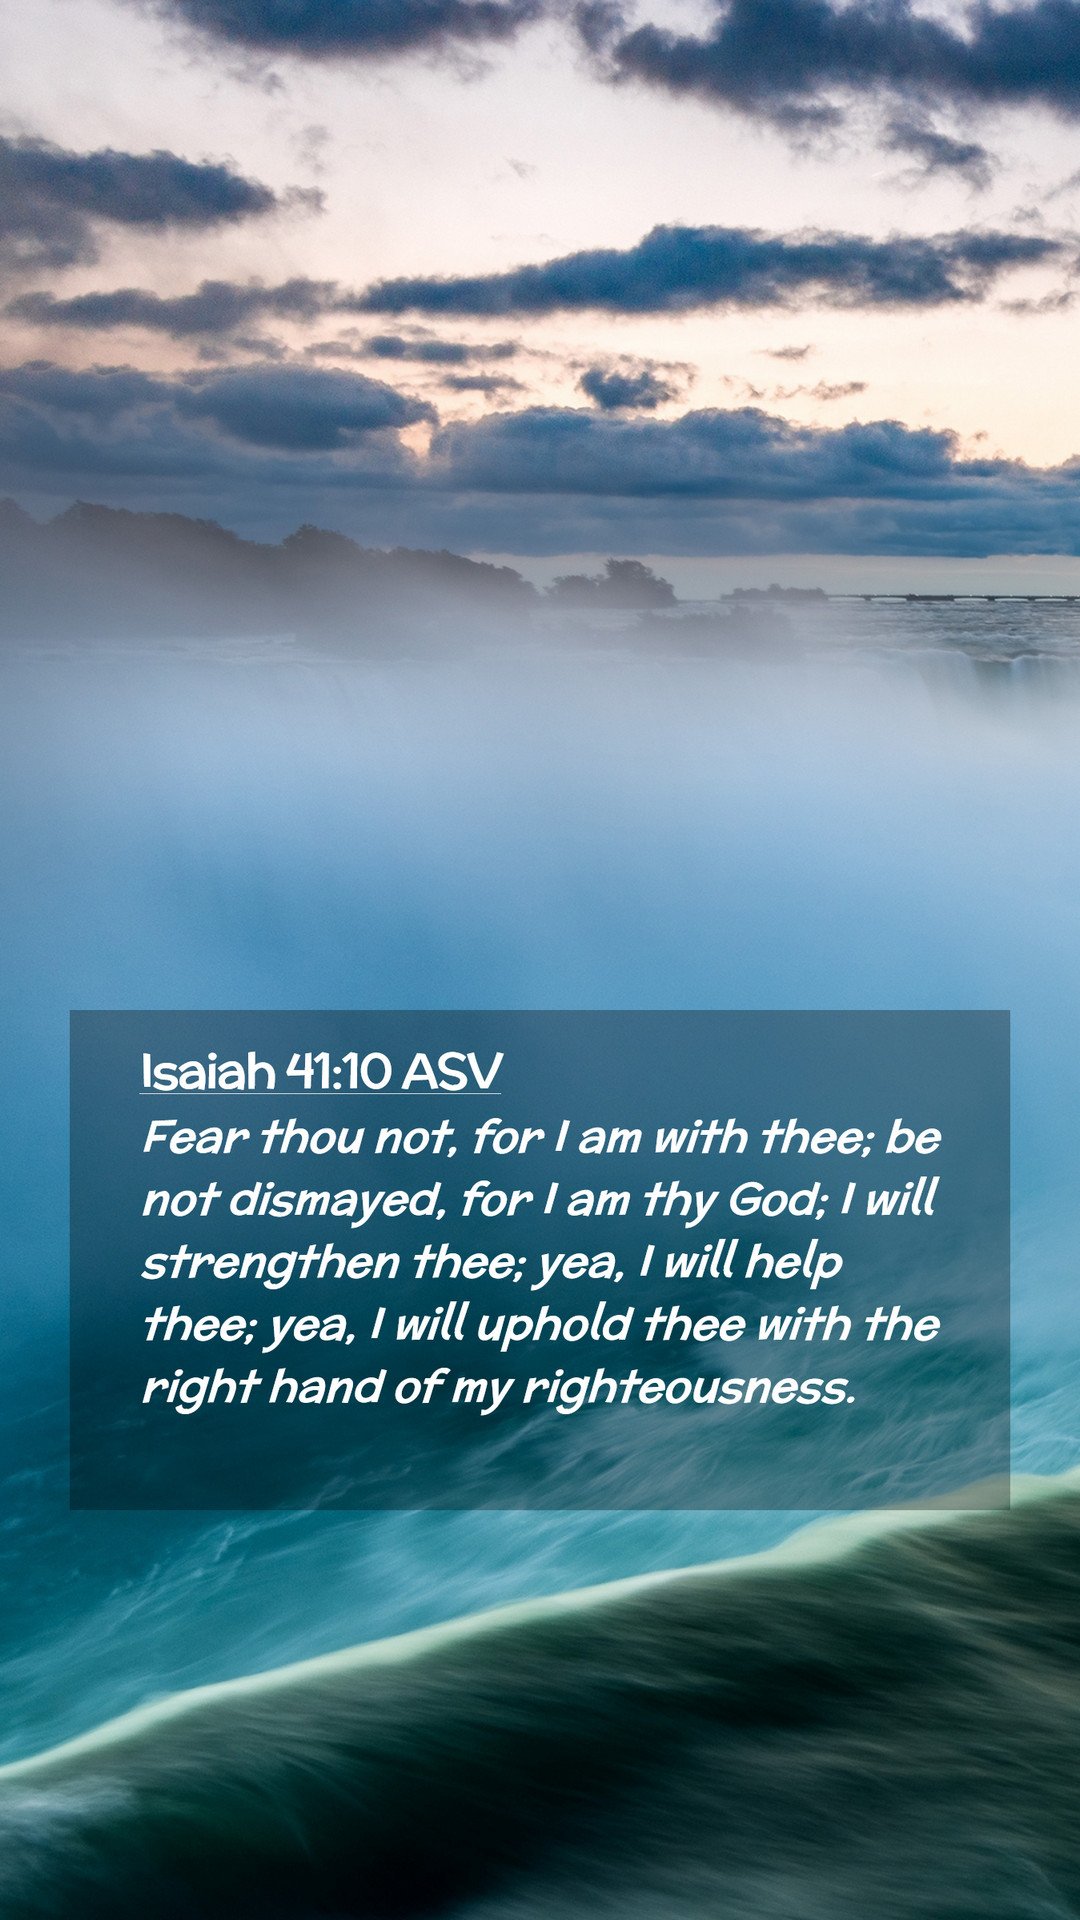 Isaiah 41:10 ASV Mobile Phone Wallpaper thou not, for I am with thee; be not